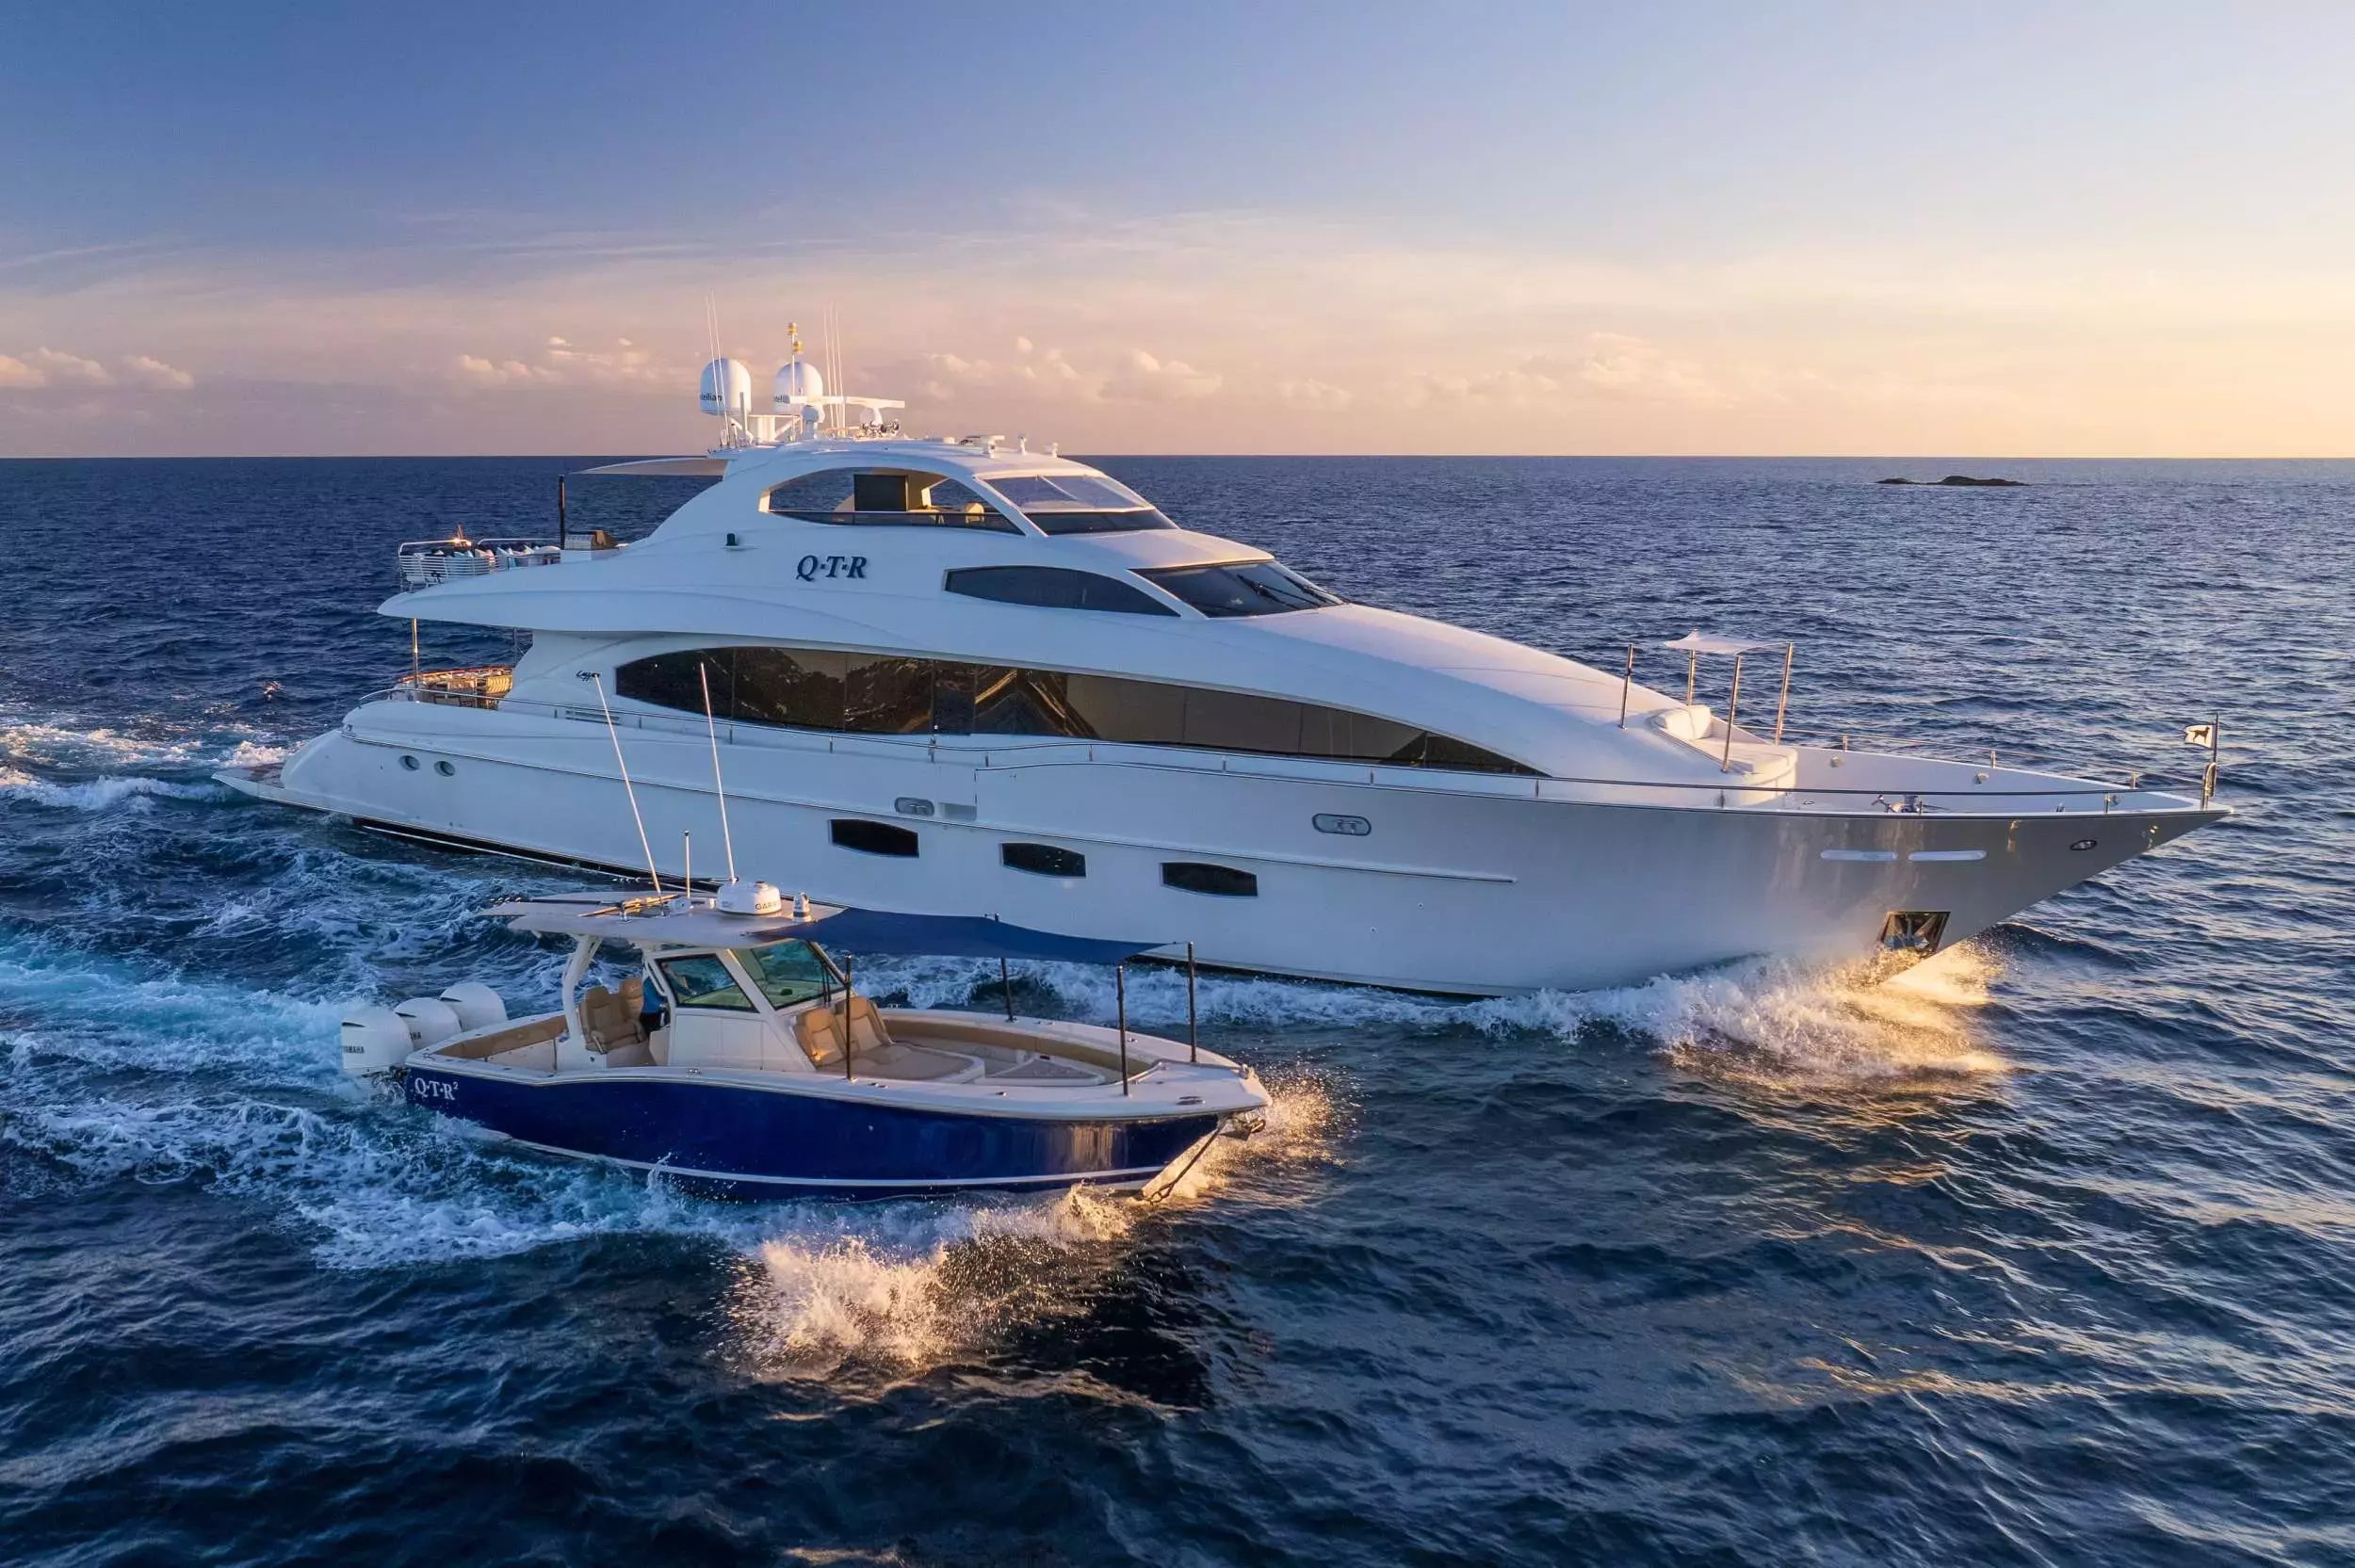 Namastay by Lazzara - Top rates for a Charter of a private Superyacht in Florida USA